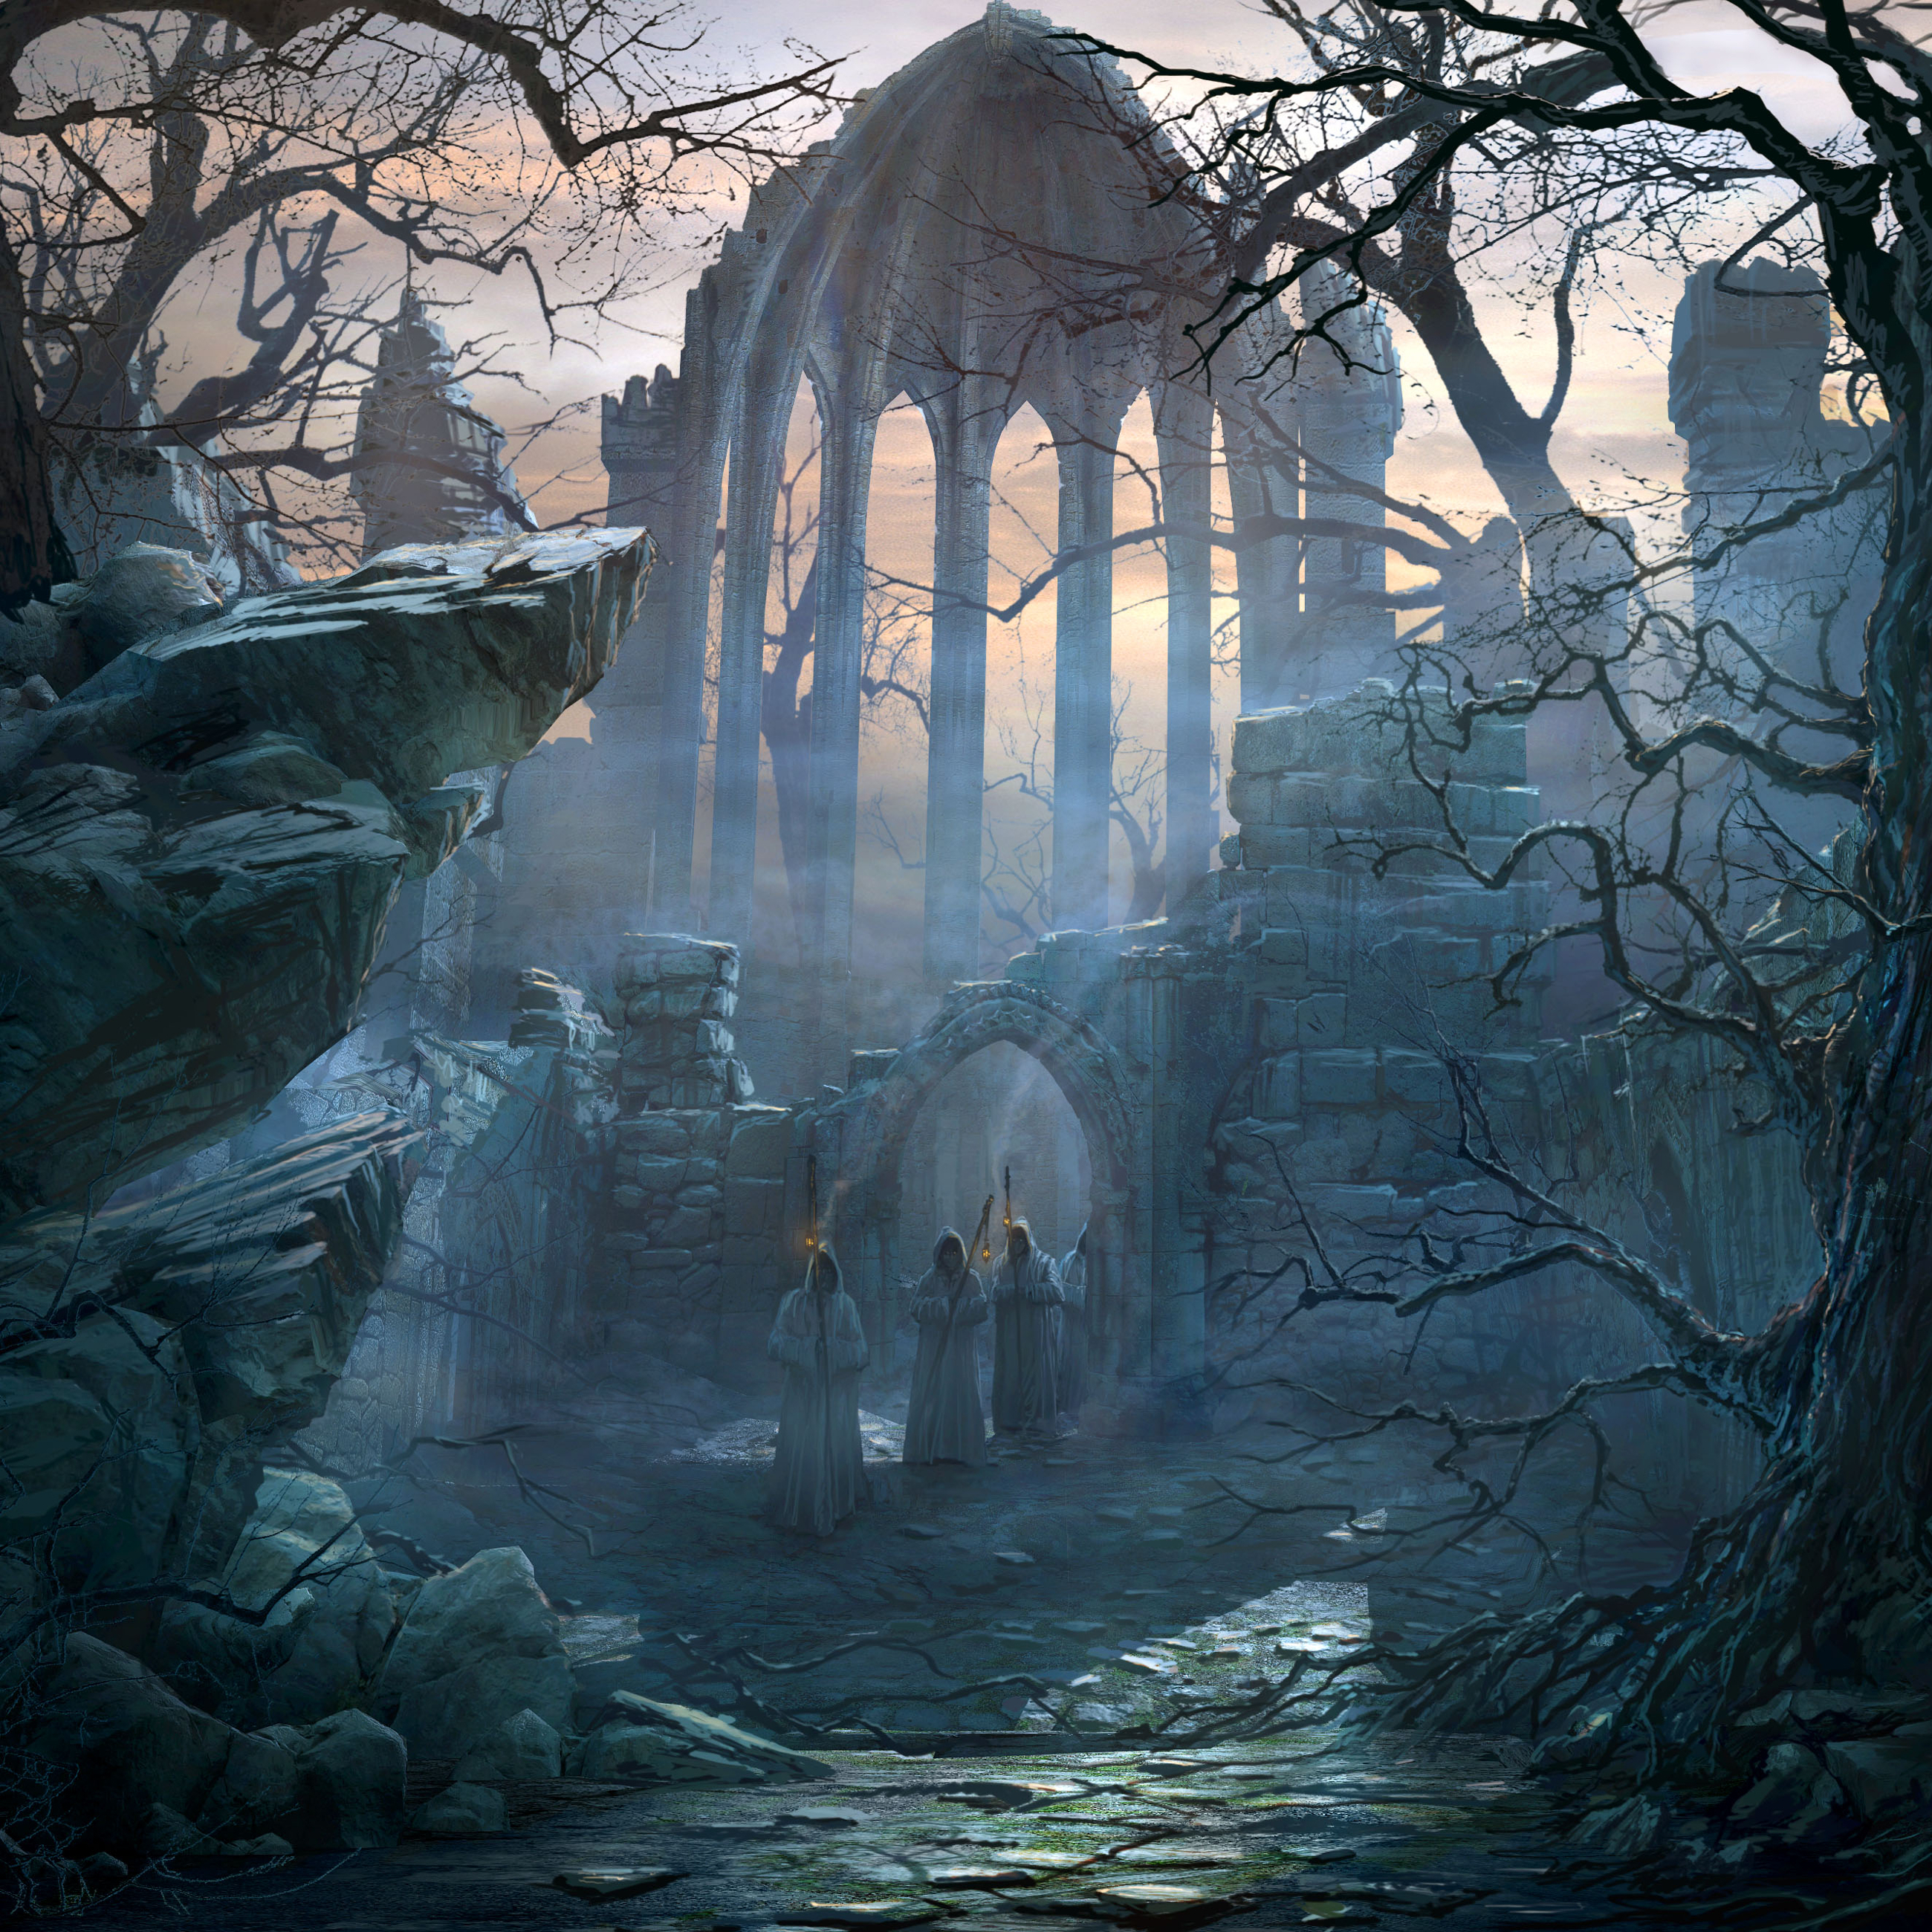 "Path to the Gothic Choir" by Rafael Lacoste